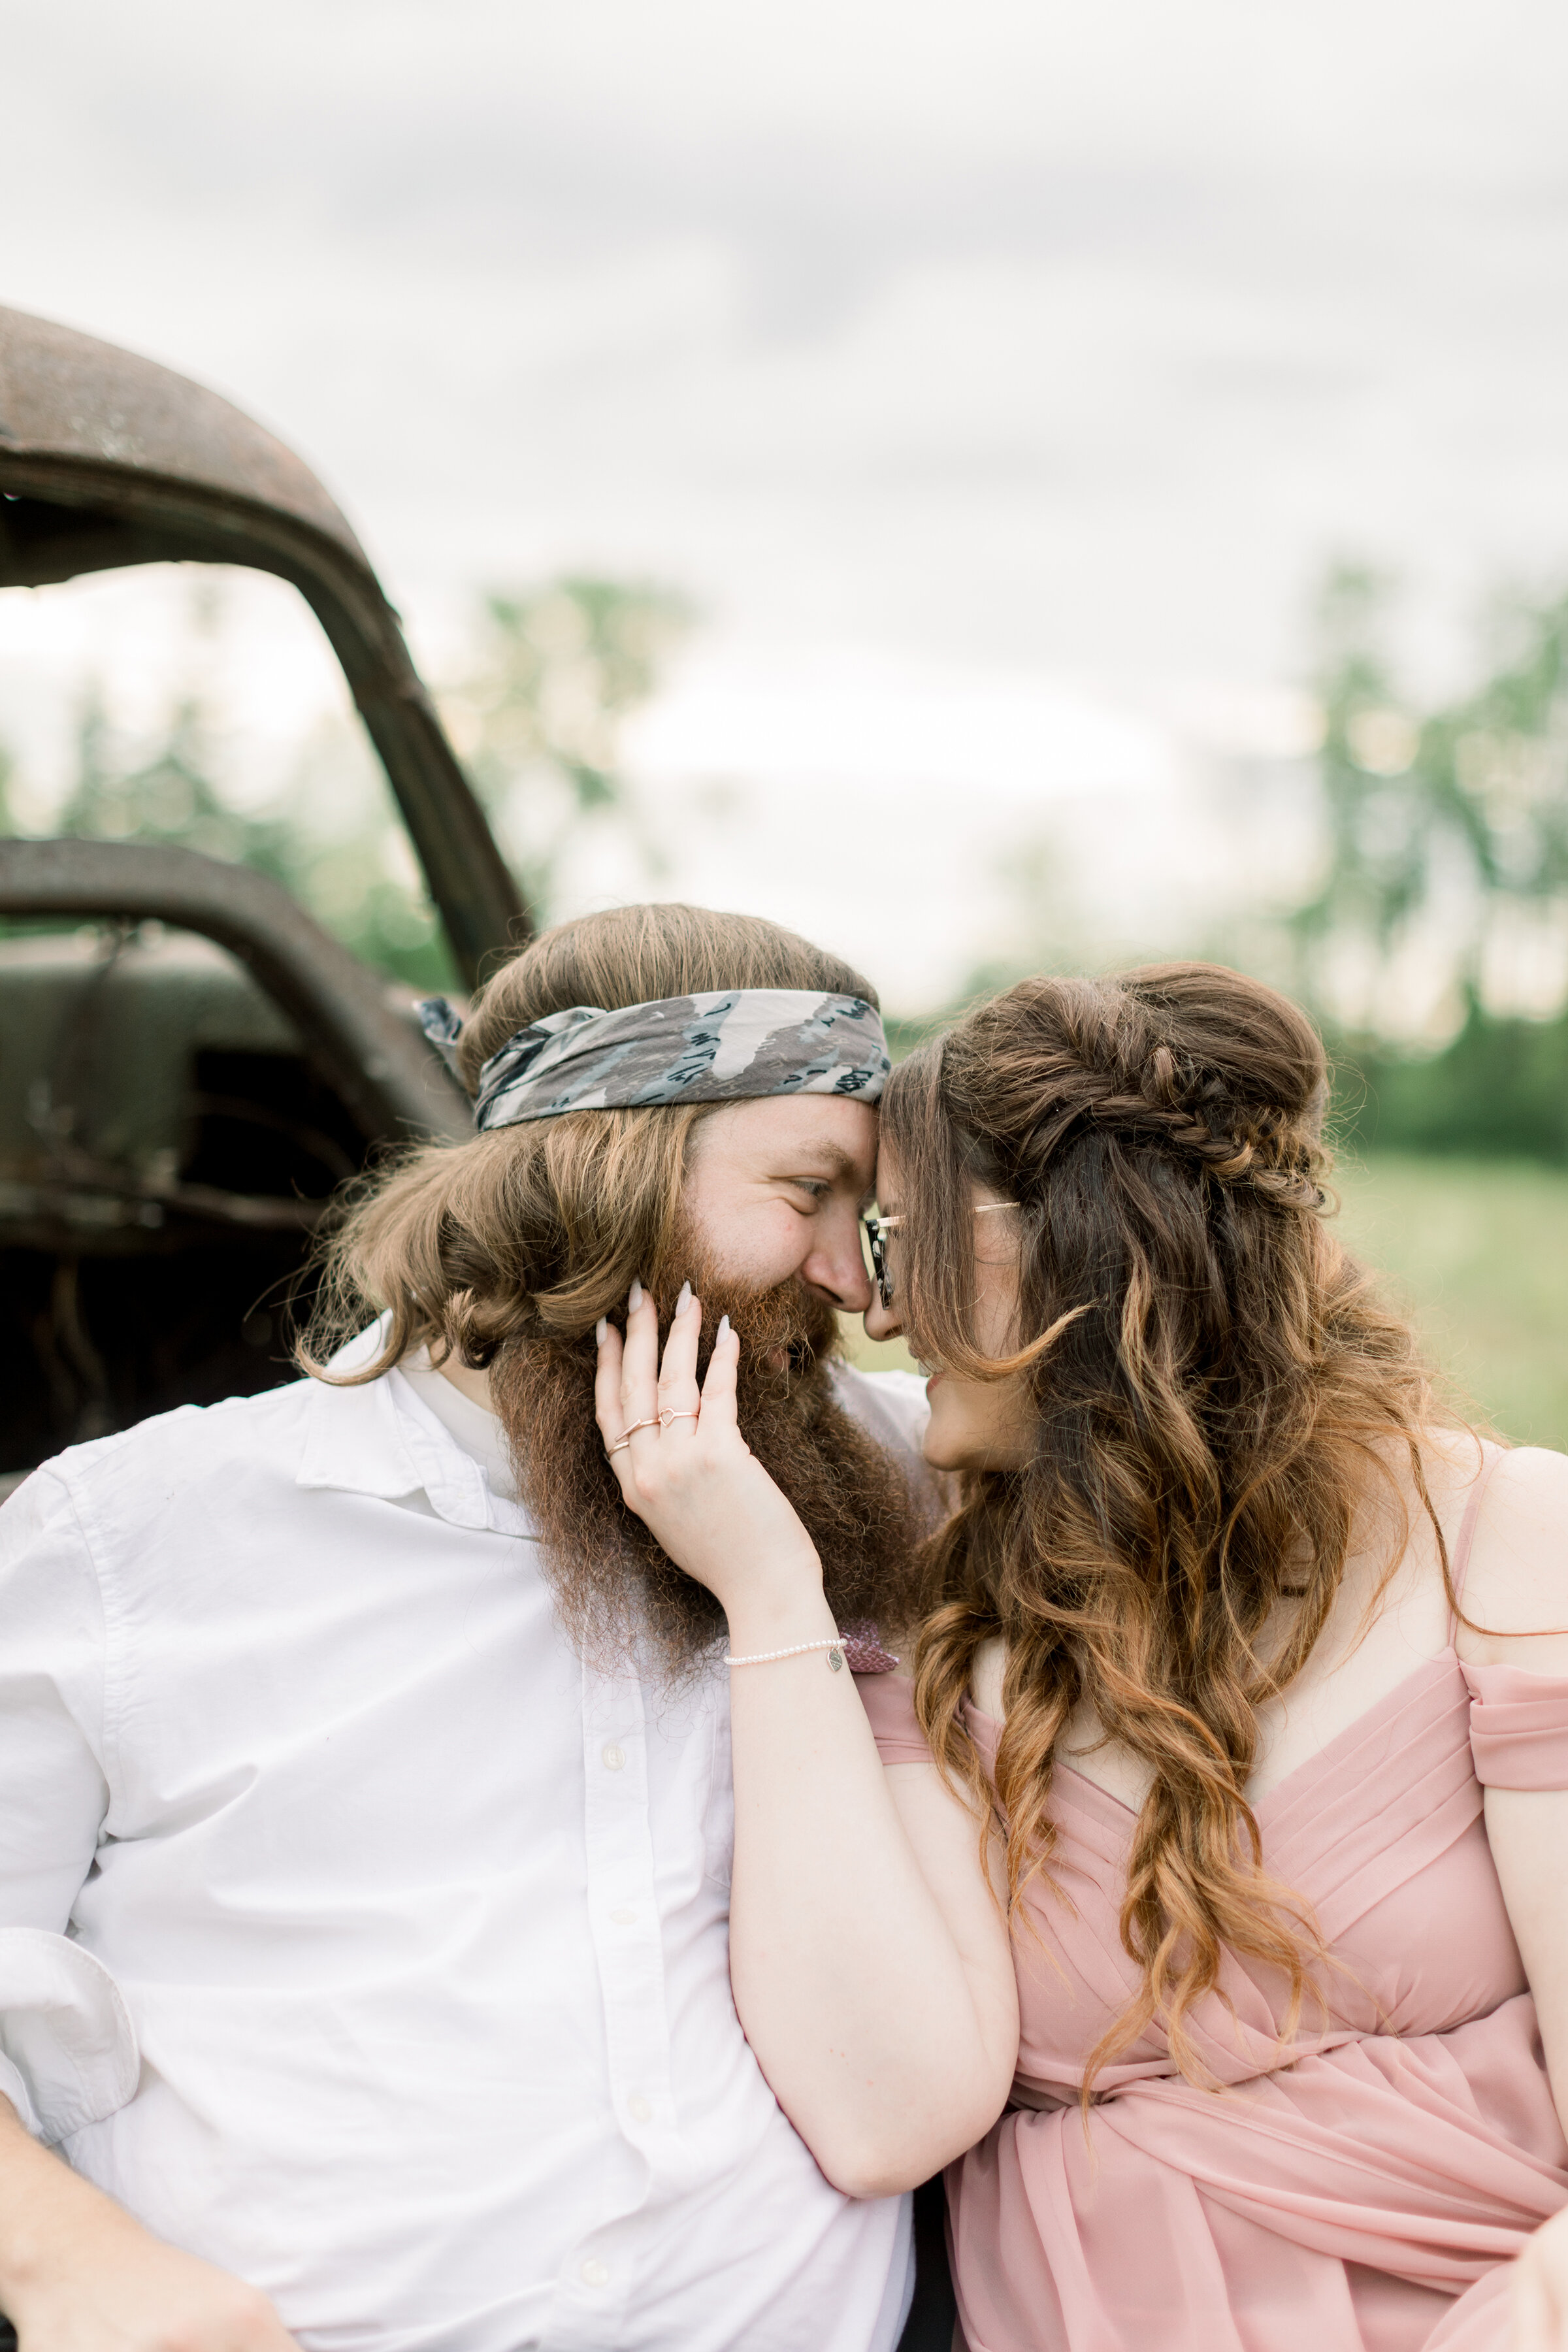  The happy couple shares a kiss during their engagement session in Ontario, Canada while sitting on a blue velvet tufted couch in a grassy field. Rusty truck vintage engagement session inspiration engagements outfit inspo camo bandana bearded groom h